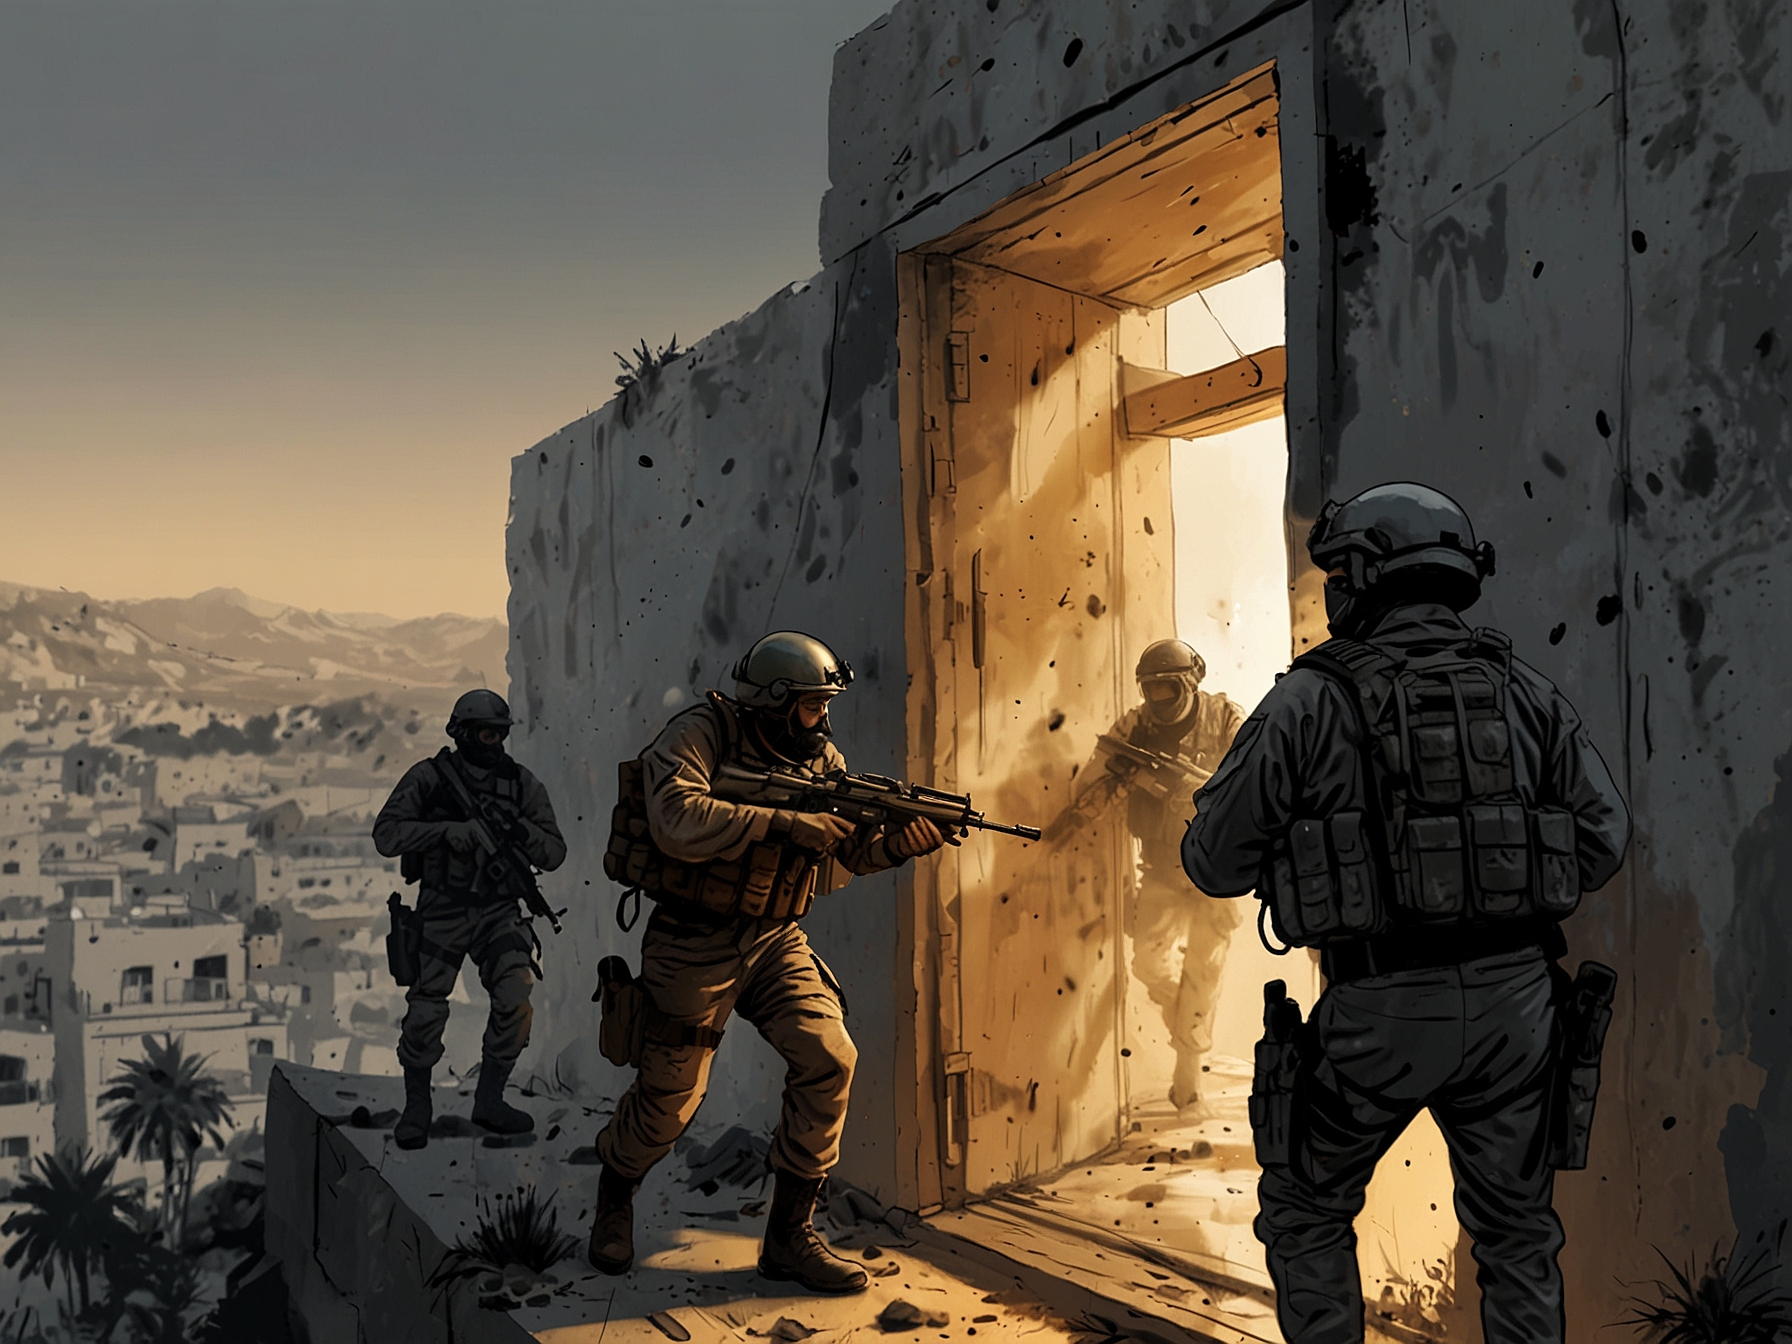 An illustration showing a tense hostage rescue operation, with Israeli special forces attempting a rescue, highlighting the complexities and risks involved in such missions.